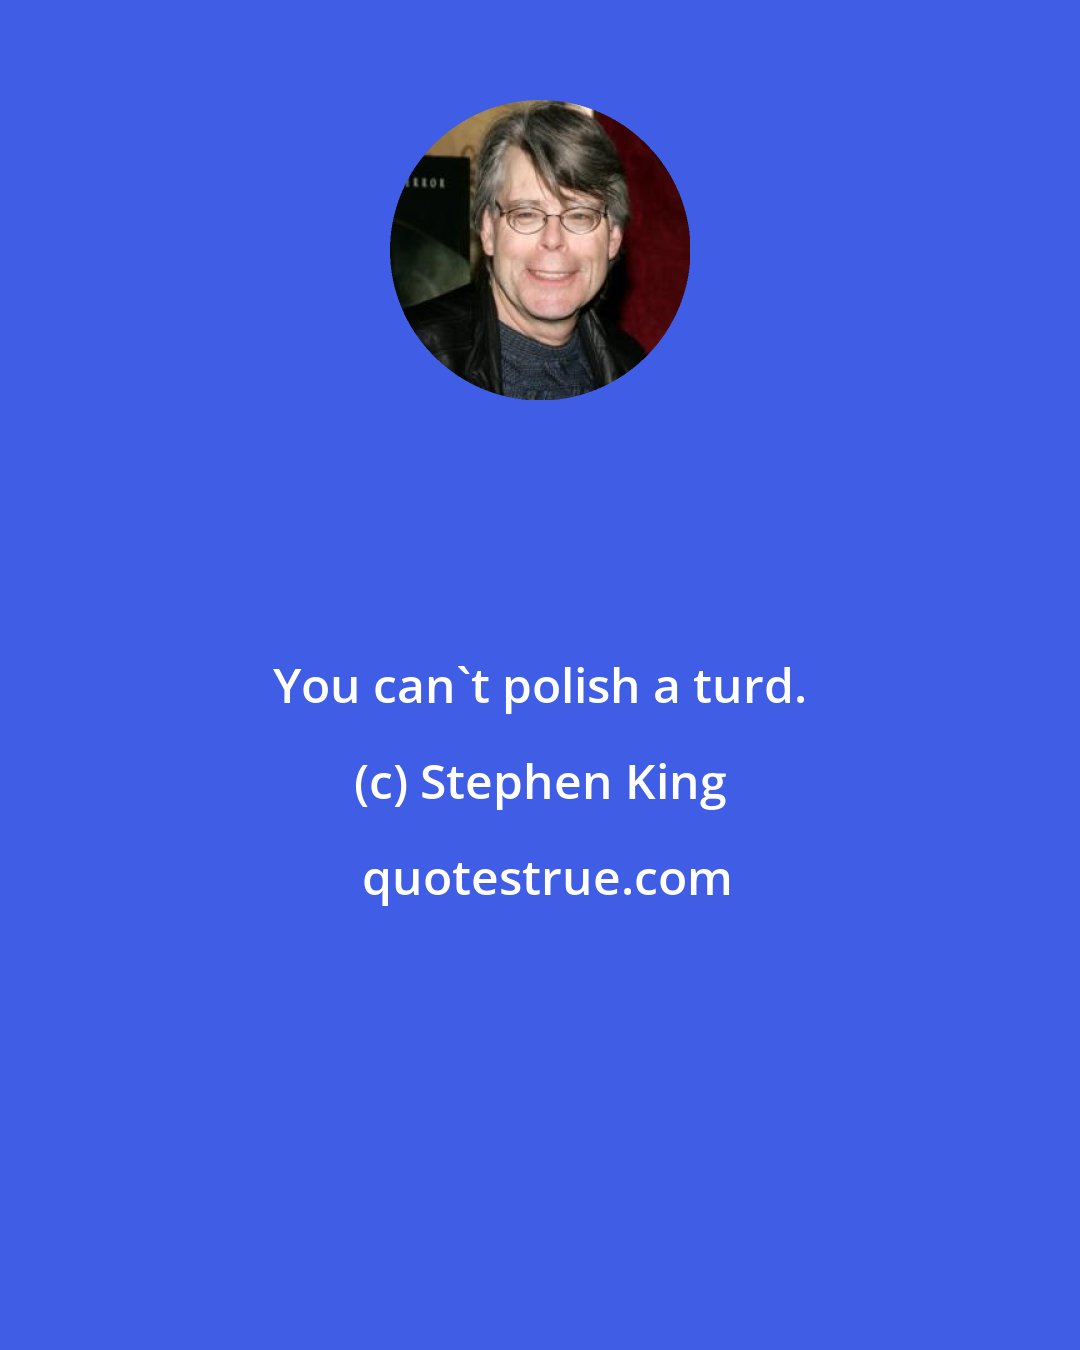 Stephen King: You can't polish a turd.